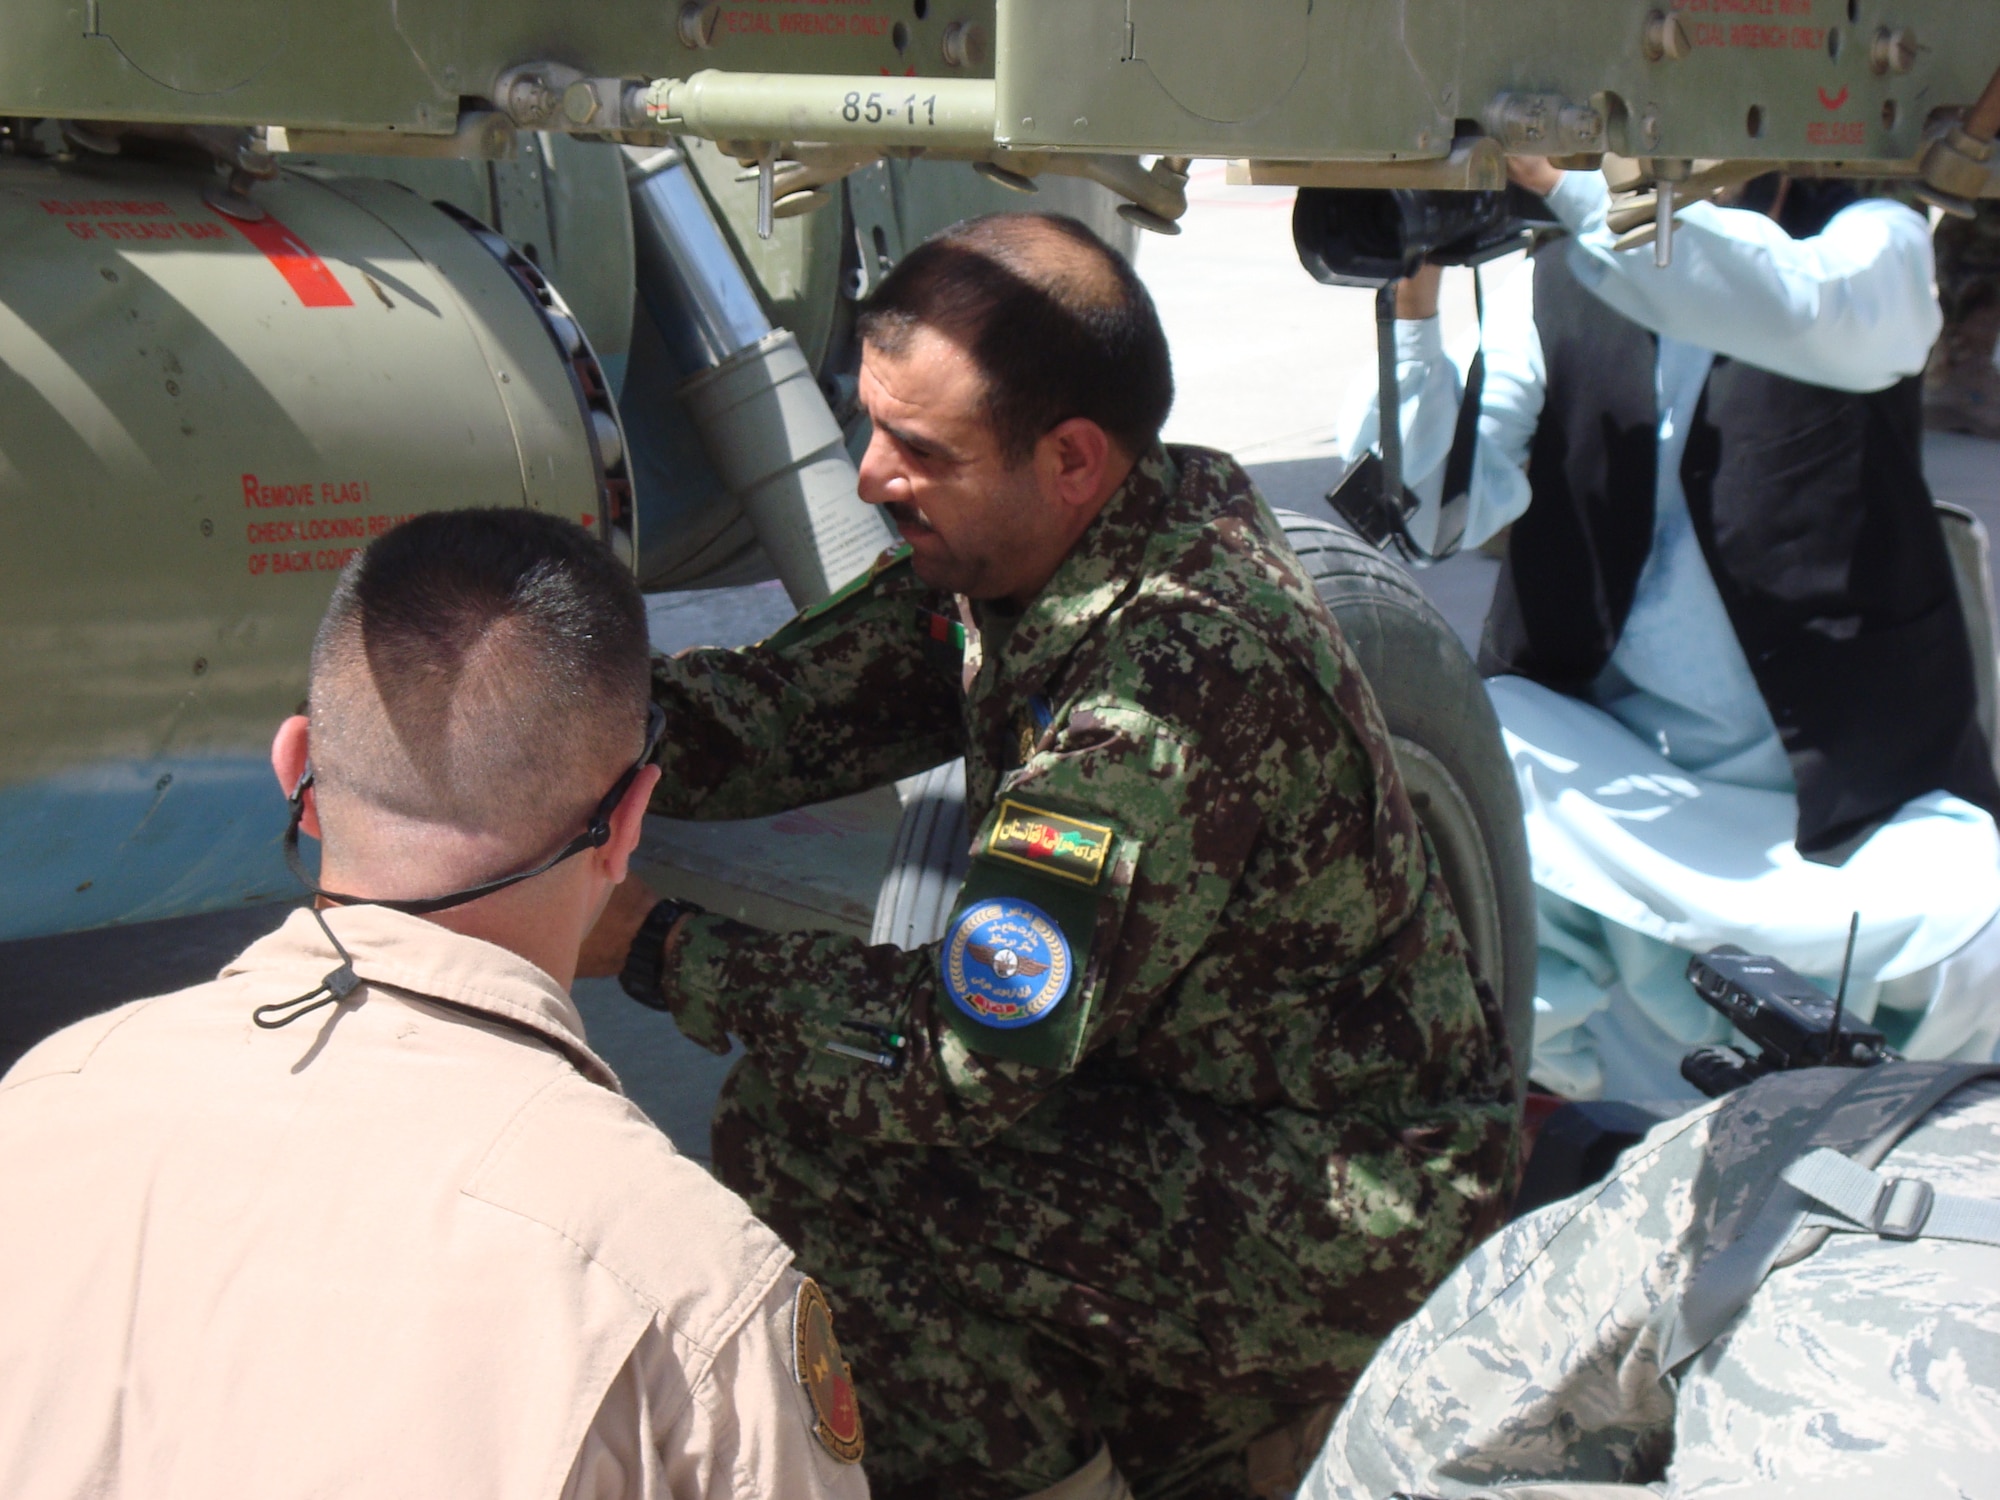 Afghan air force Maj. Gen. Sherzai loads a rocket at the first AAF arming point May 15, 2011,  Kandahar Airfield, Afghanistan. Kandahar Air Wing officials opened the first Afghan Mi-17 weapons arming point May 15. (U.S. Air Force courtesy photo) 